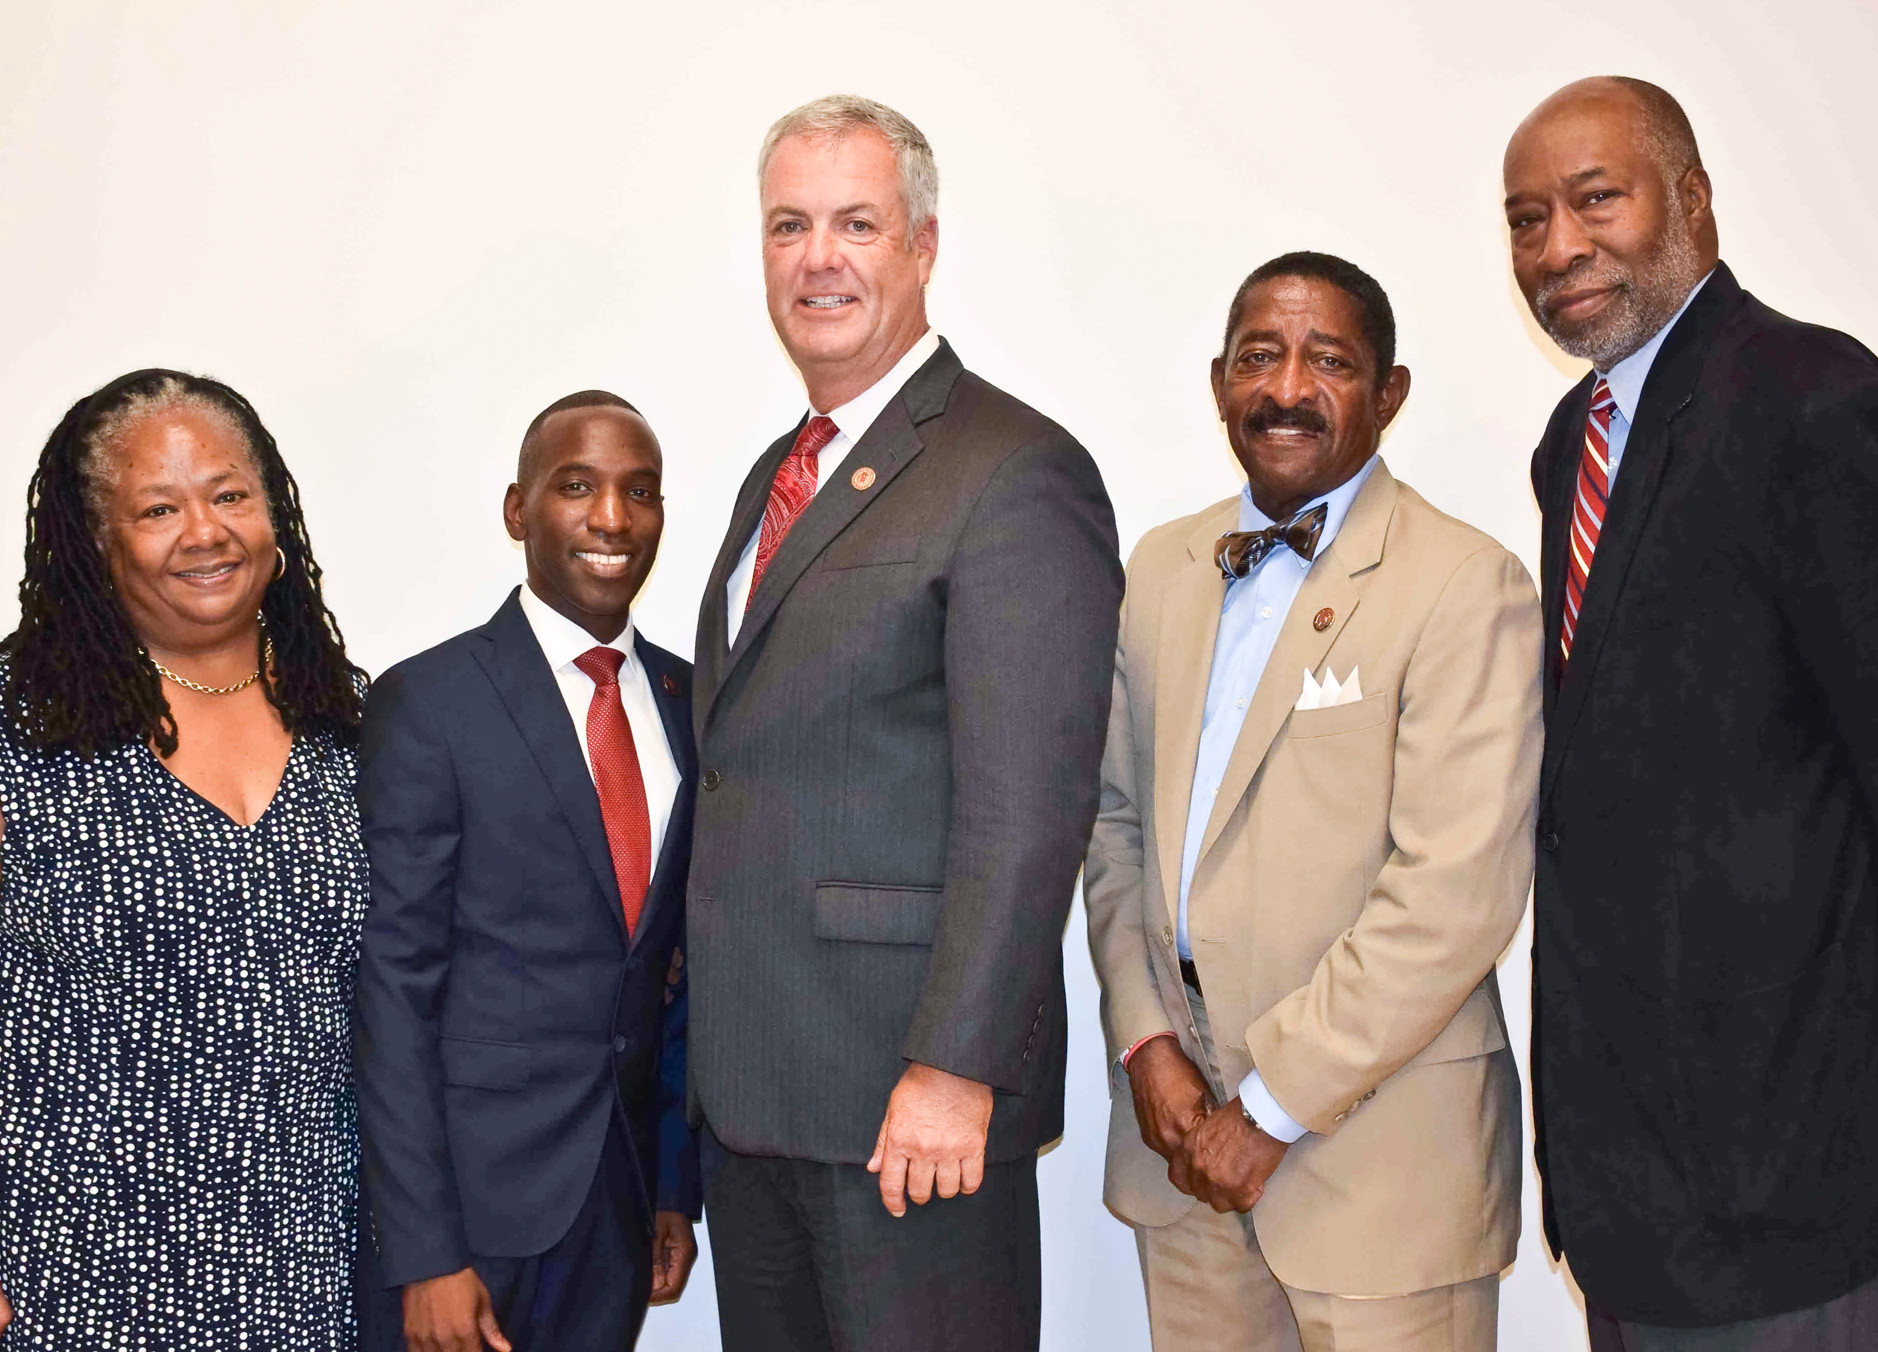 The Freeport Board of Education. From left are school board members Vilma Lancaster, Anthony Miller, President Michael Pomerico, Ron Ellerbe and Ernest Kight.